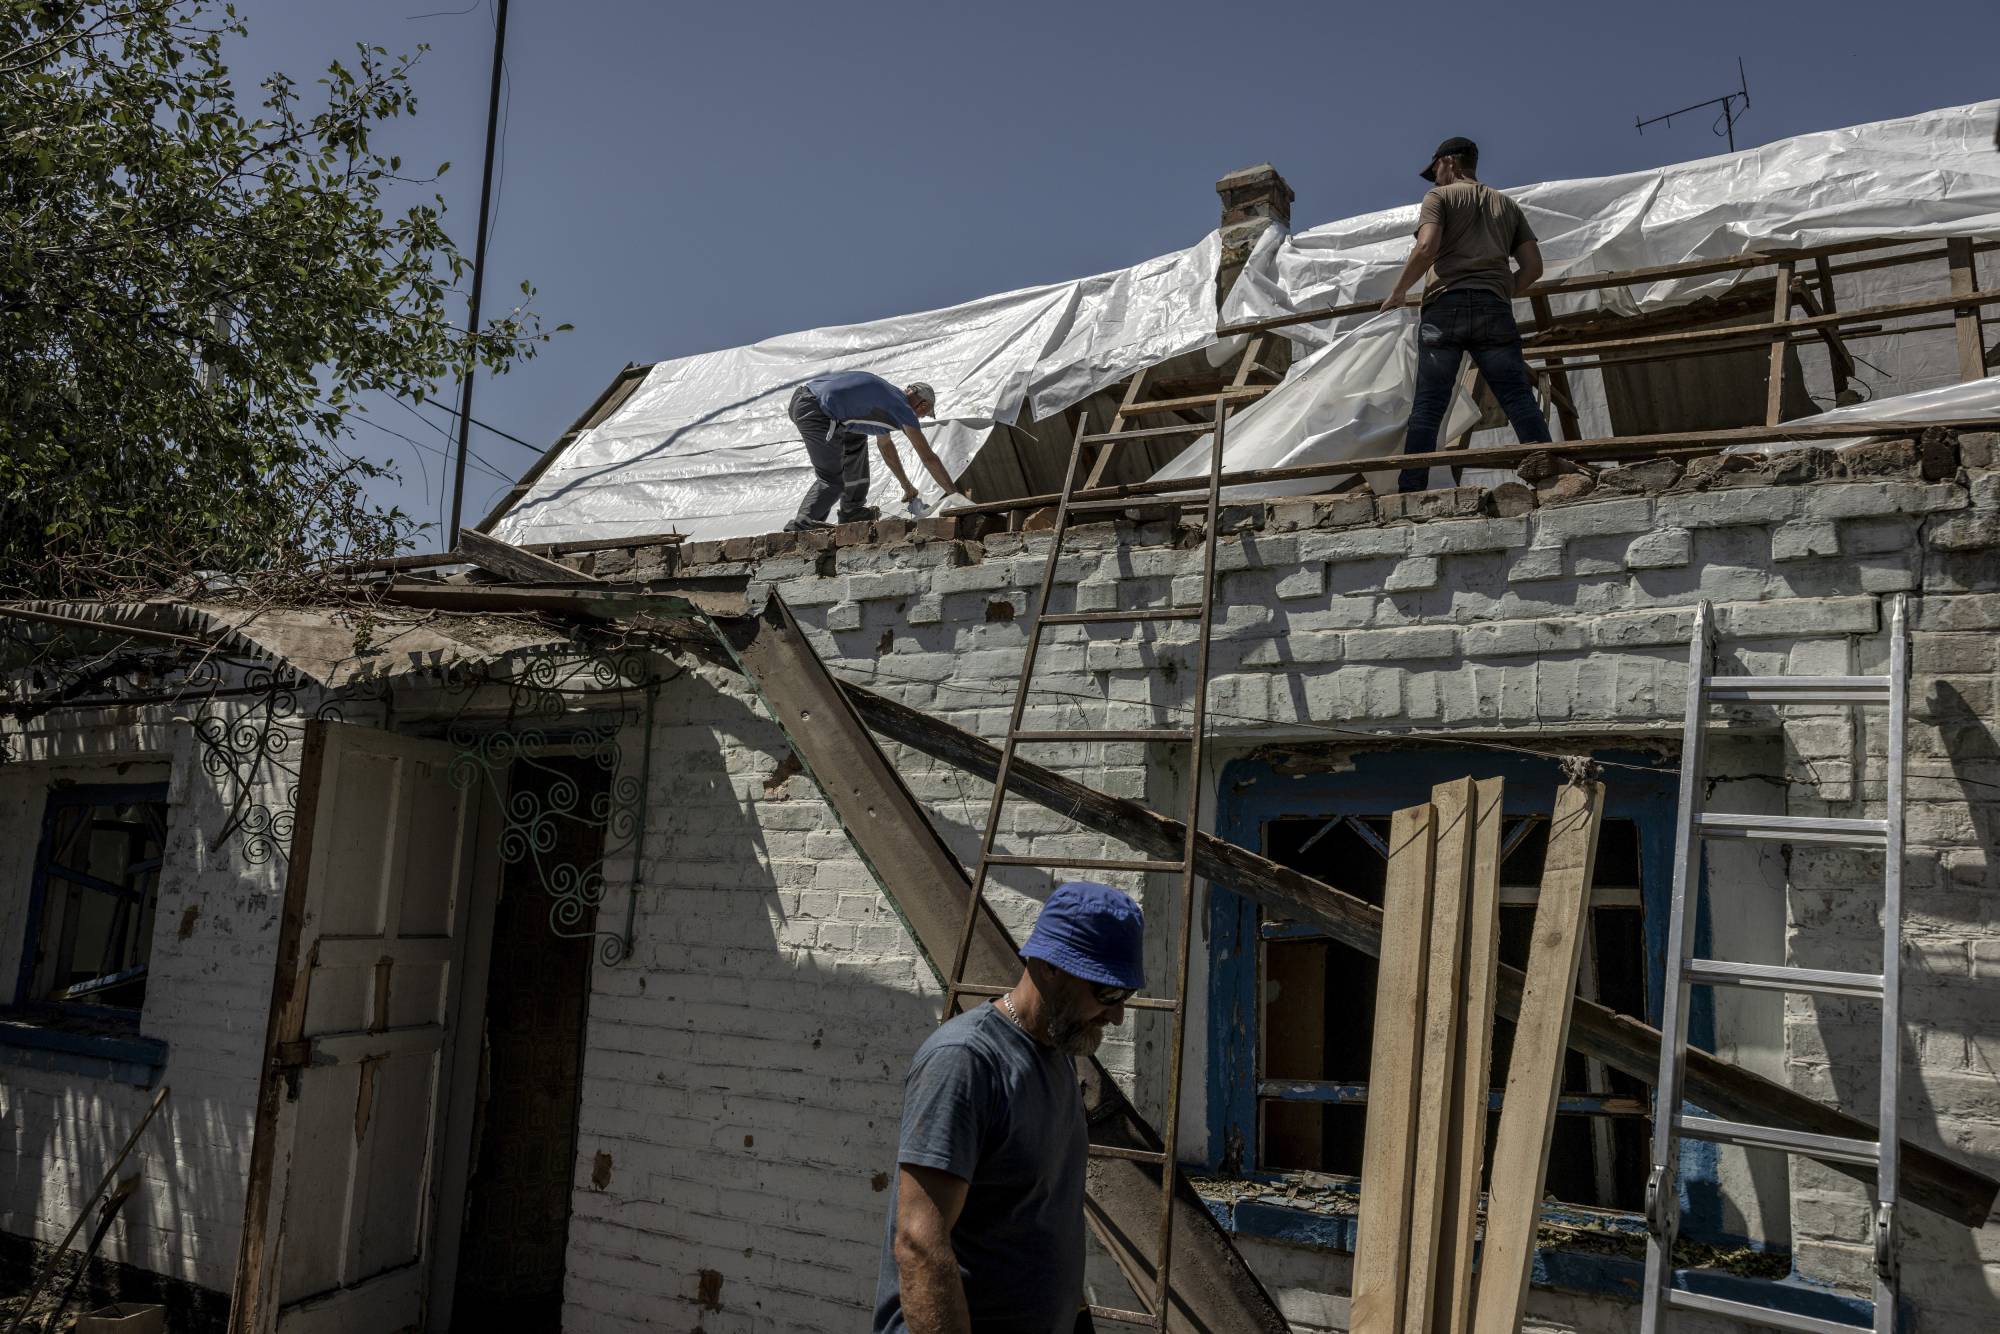 Residents repair a home damaged overnight by Russian shelling in Nikopol, Ukraine, on July 3. Ukrainians who live near the Russian-Occupied Zaporizhzhia Nuclear Power Plant have grown largely complacent about the dangers despite urgent government warnings.  | FINBARR O’REILLY / THE NEW YORK TIMES